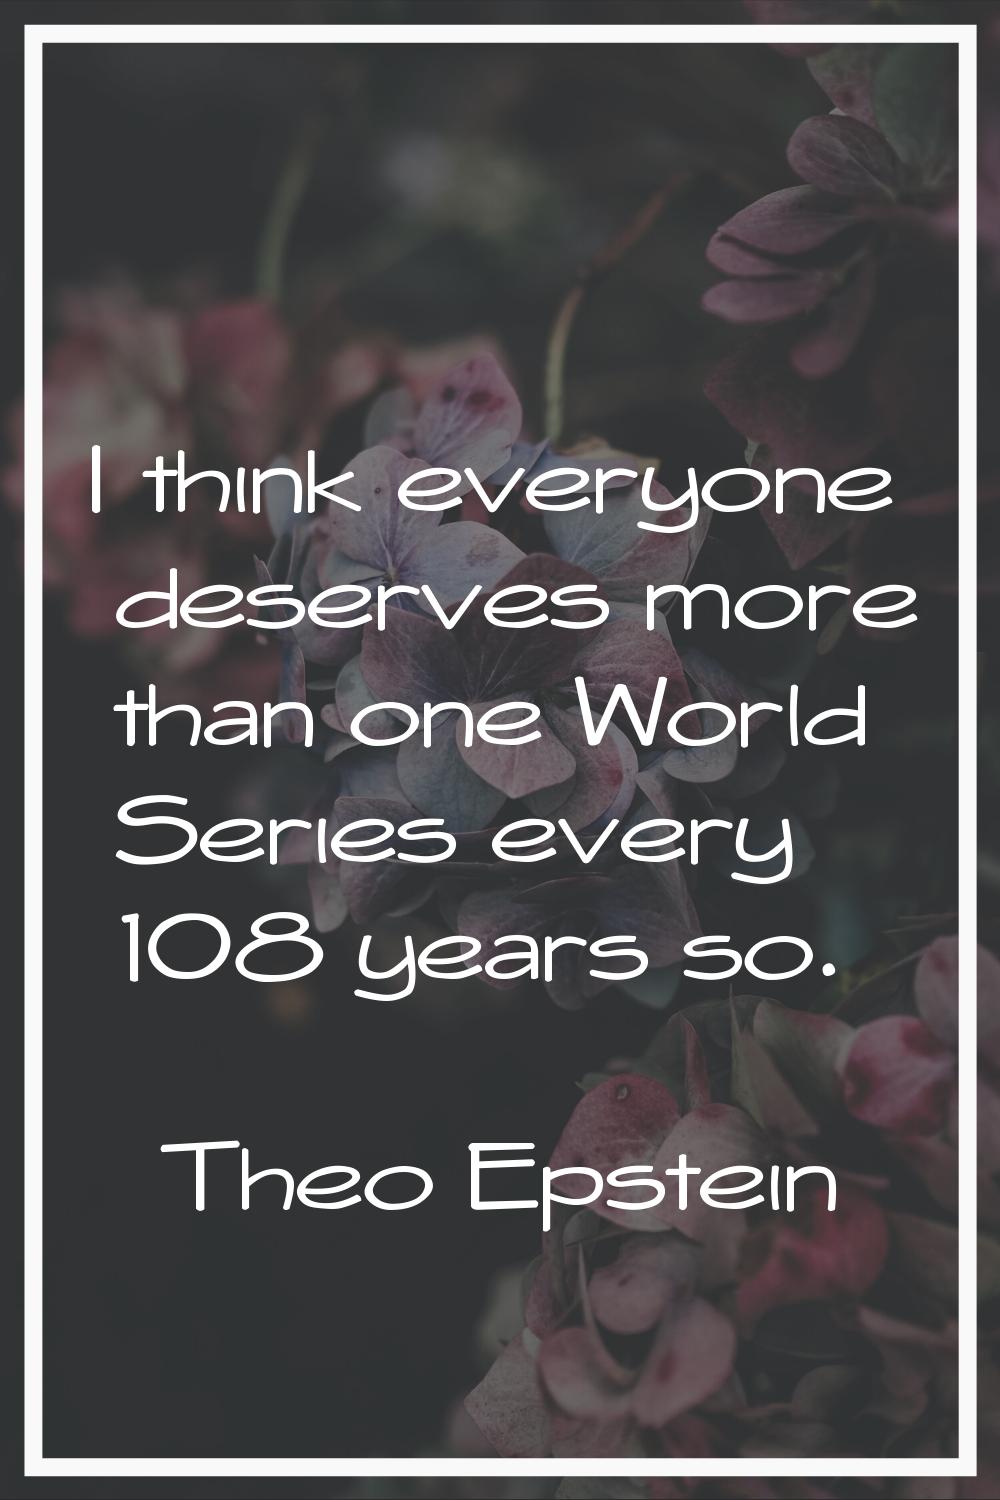 I think everyone deserves more than one World Series every 108 years so.